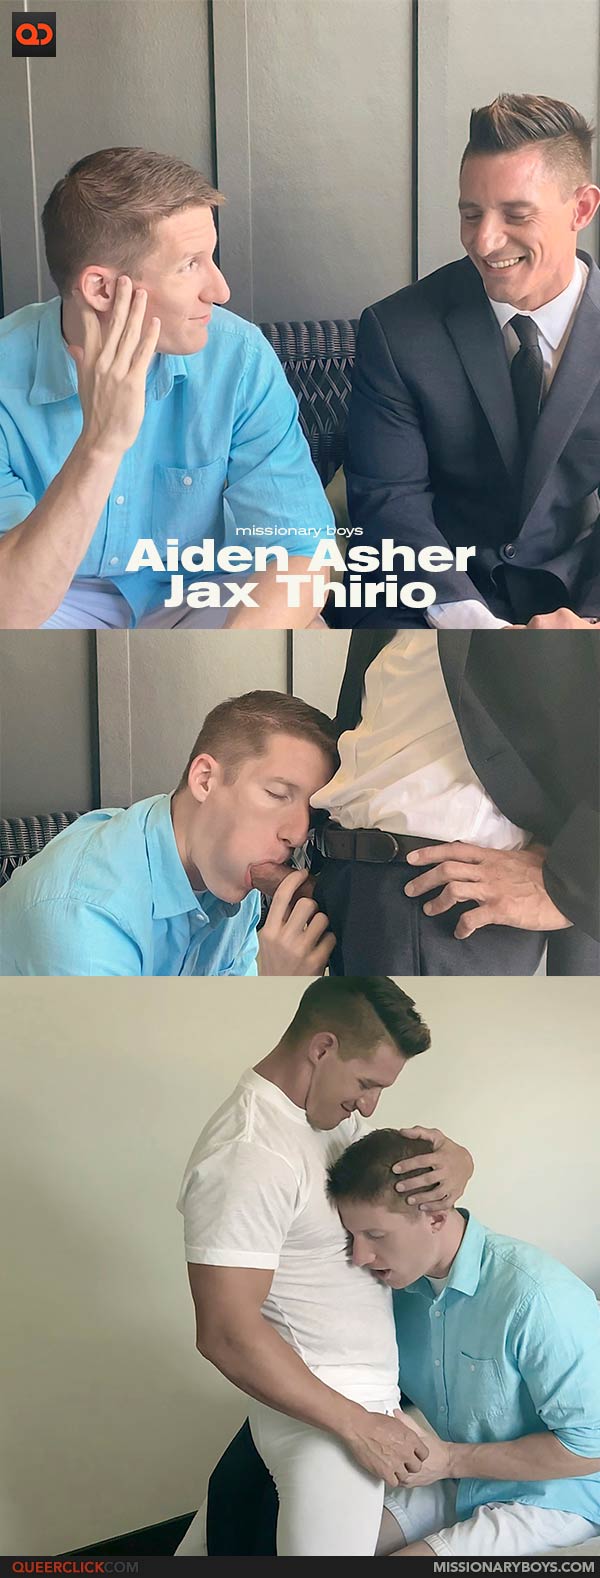 Missionary Boys: Aiden Asher and Jax Thirio